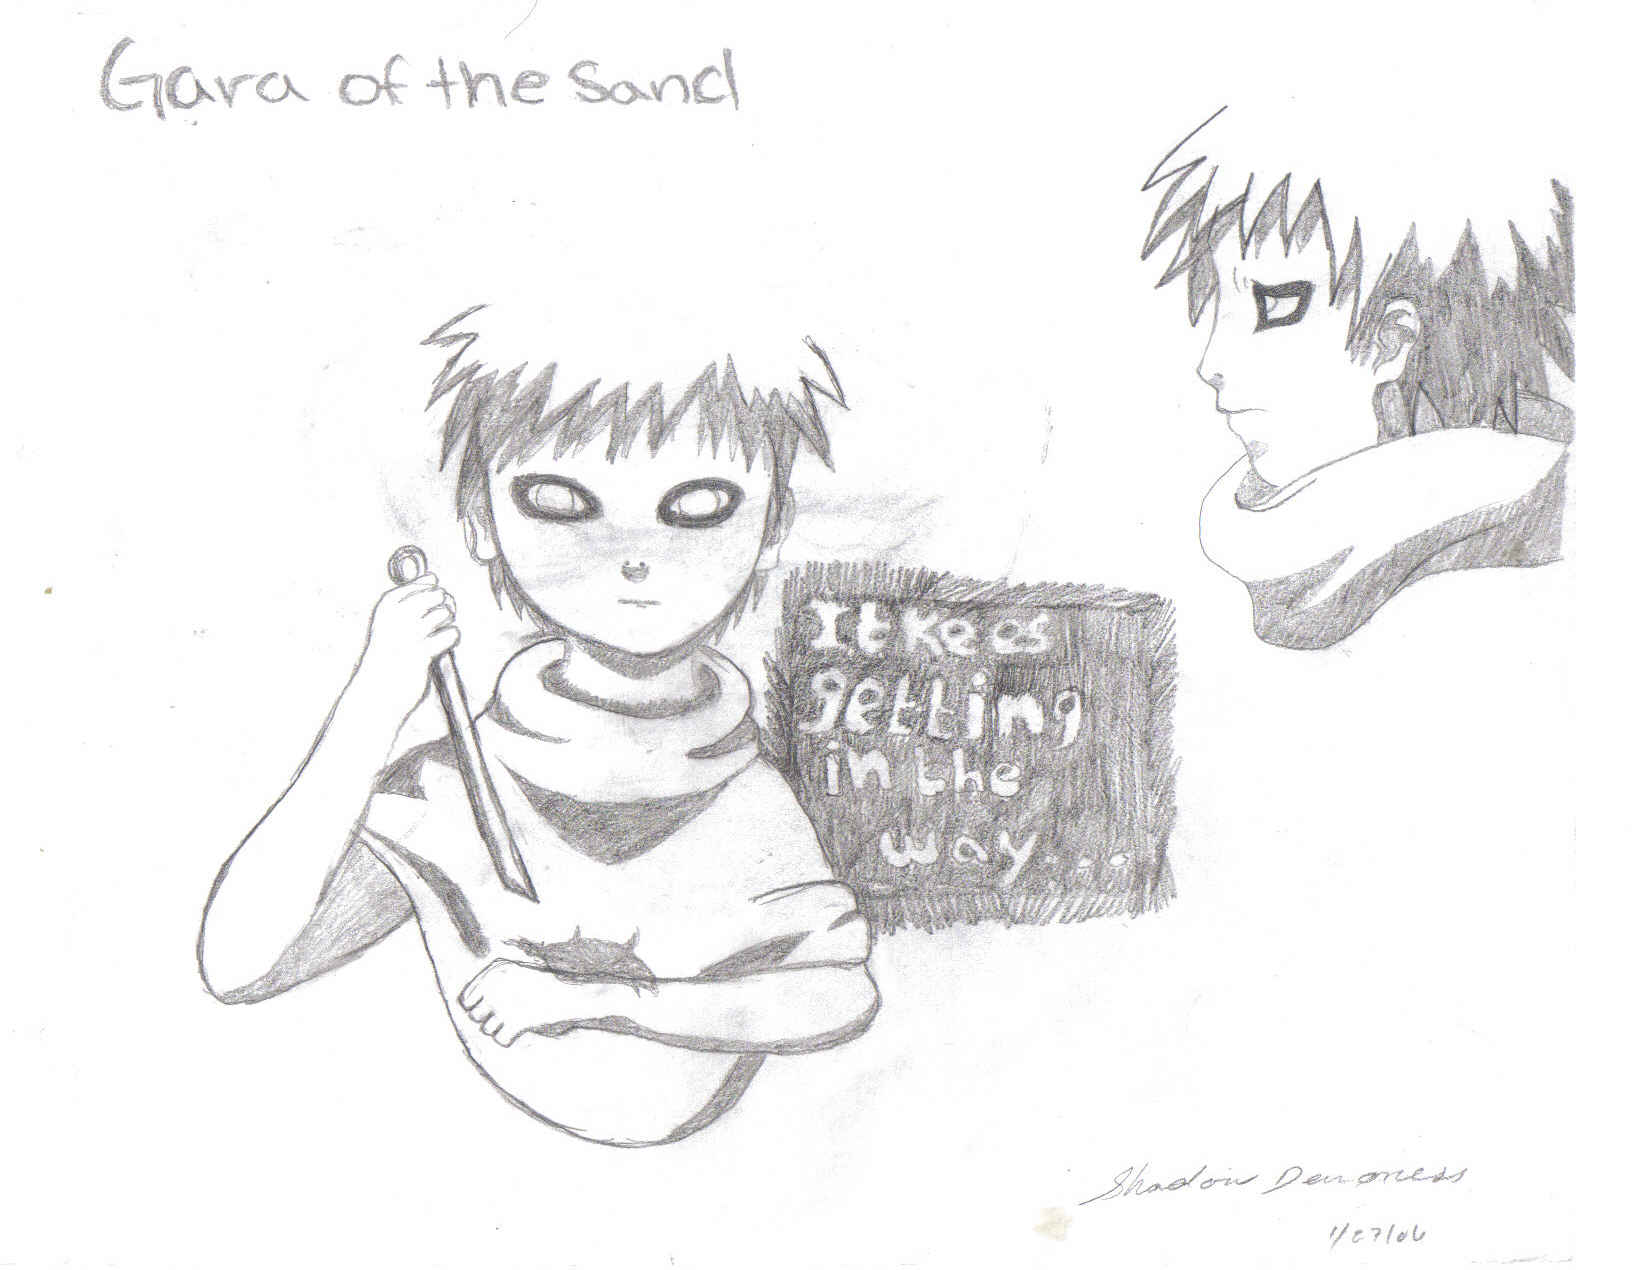 Gaara of the Sand by shadow_demoness